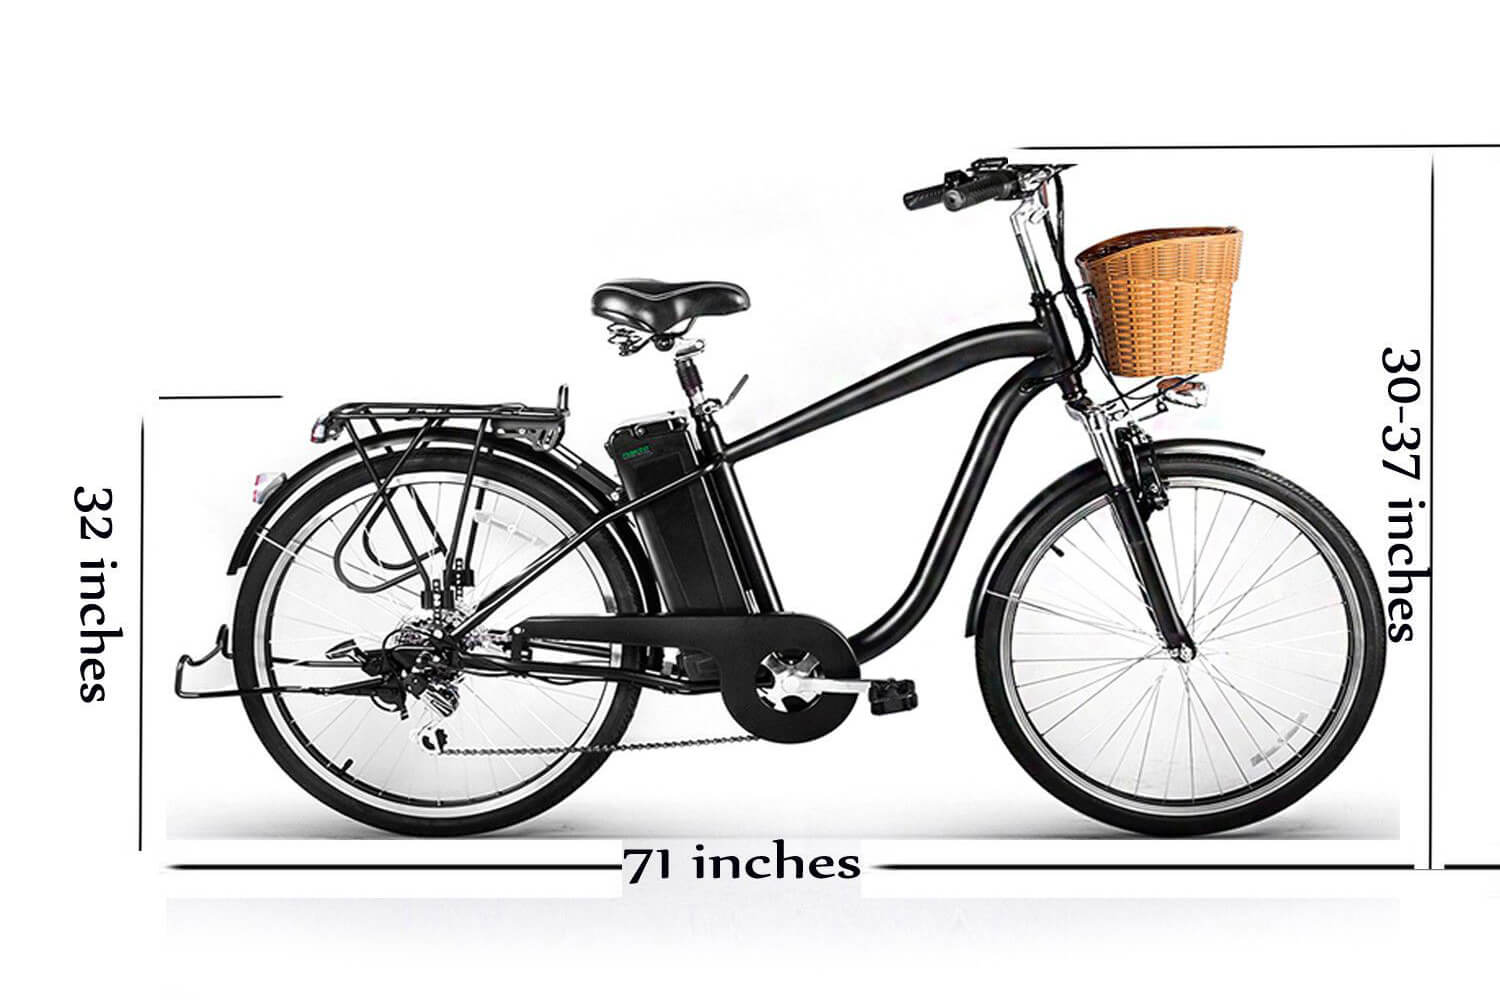 nakto classic city electric bicycle